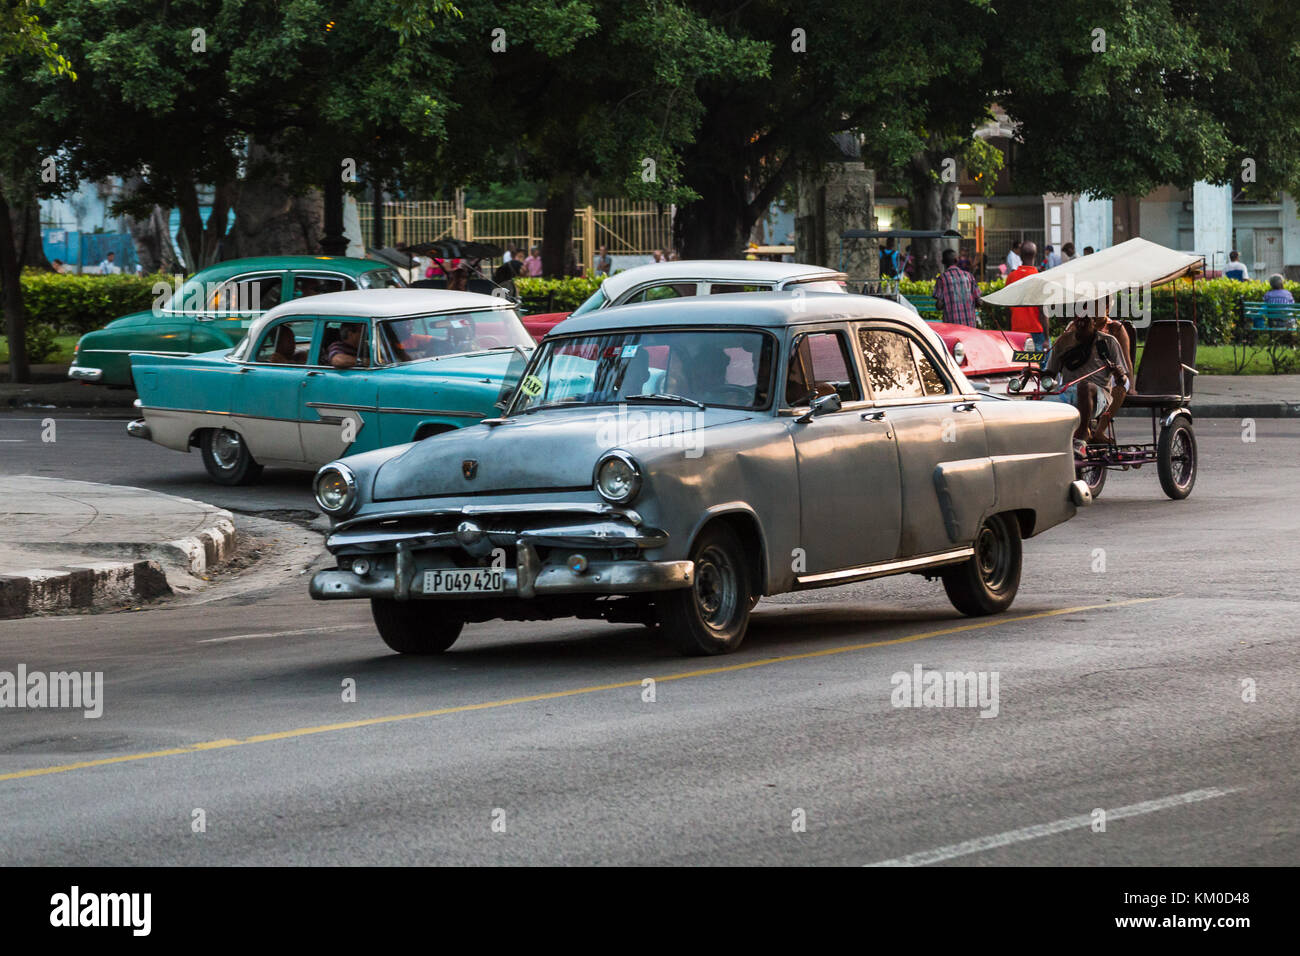 A bicitaxi and four American classical cars from the 1950s captured in a tight frame at sunset one August evening in 2014 on the streets of Havana. Stock Photo